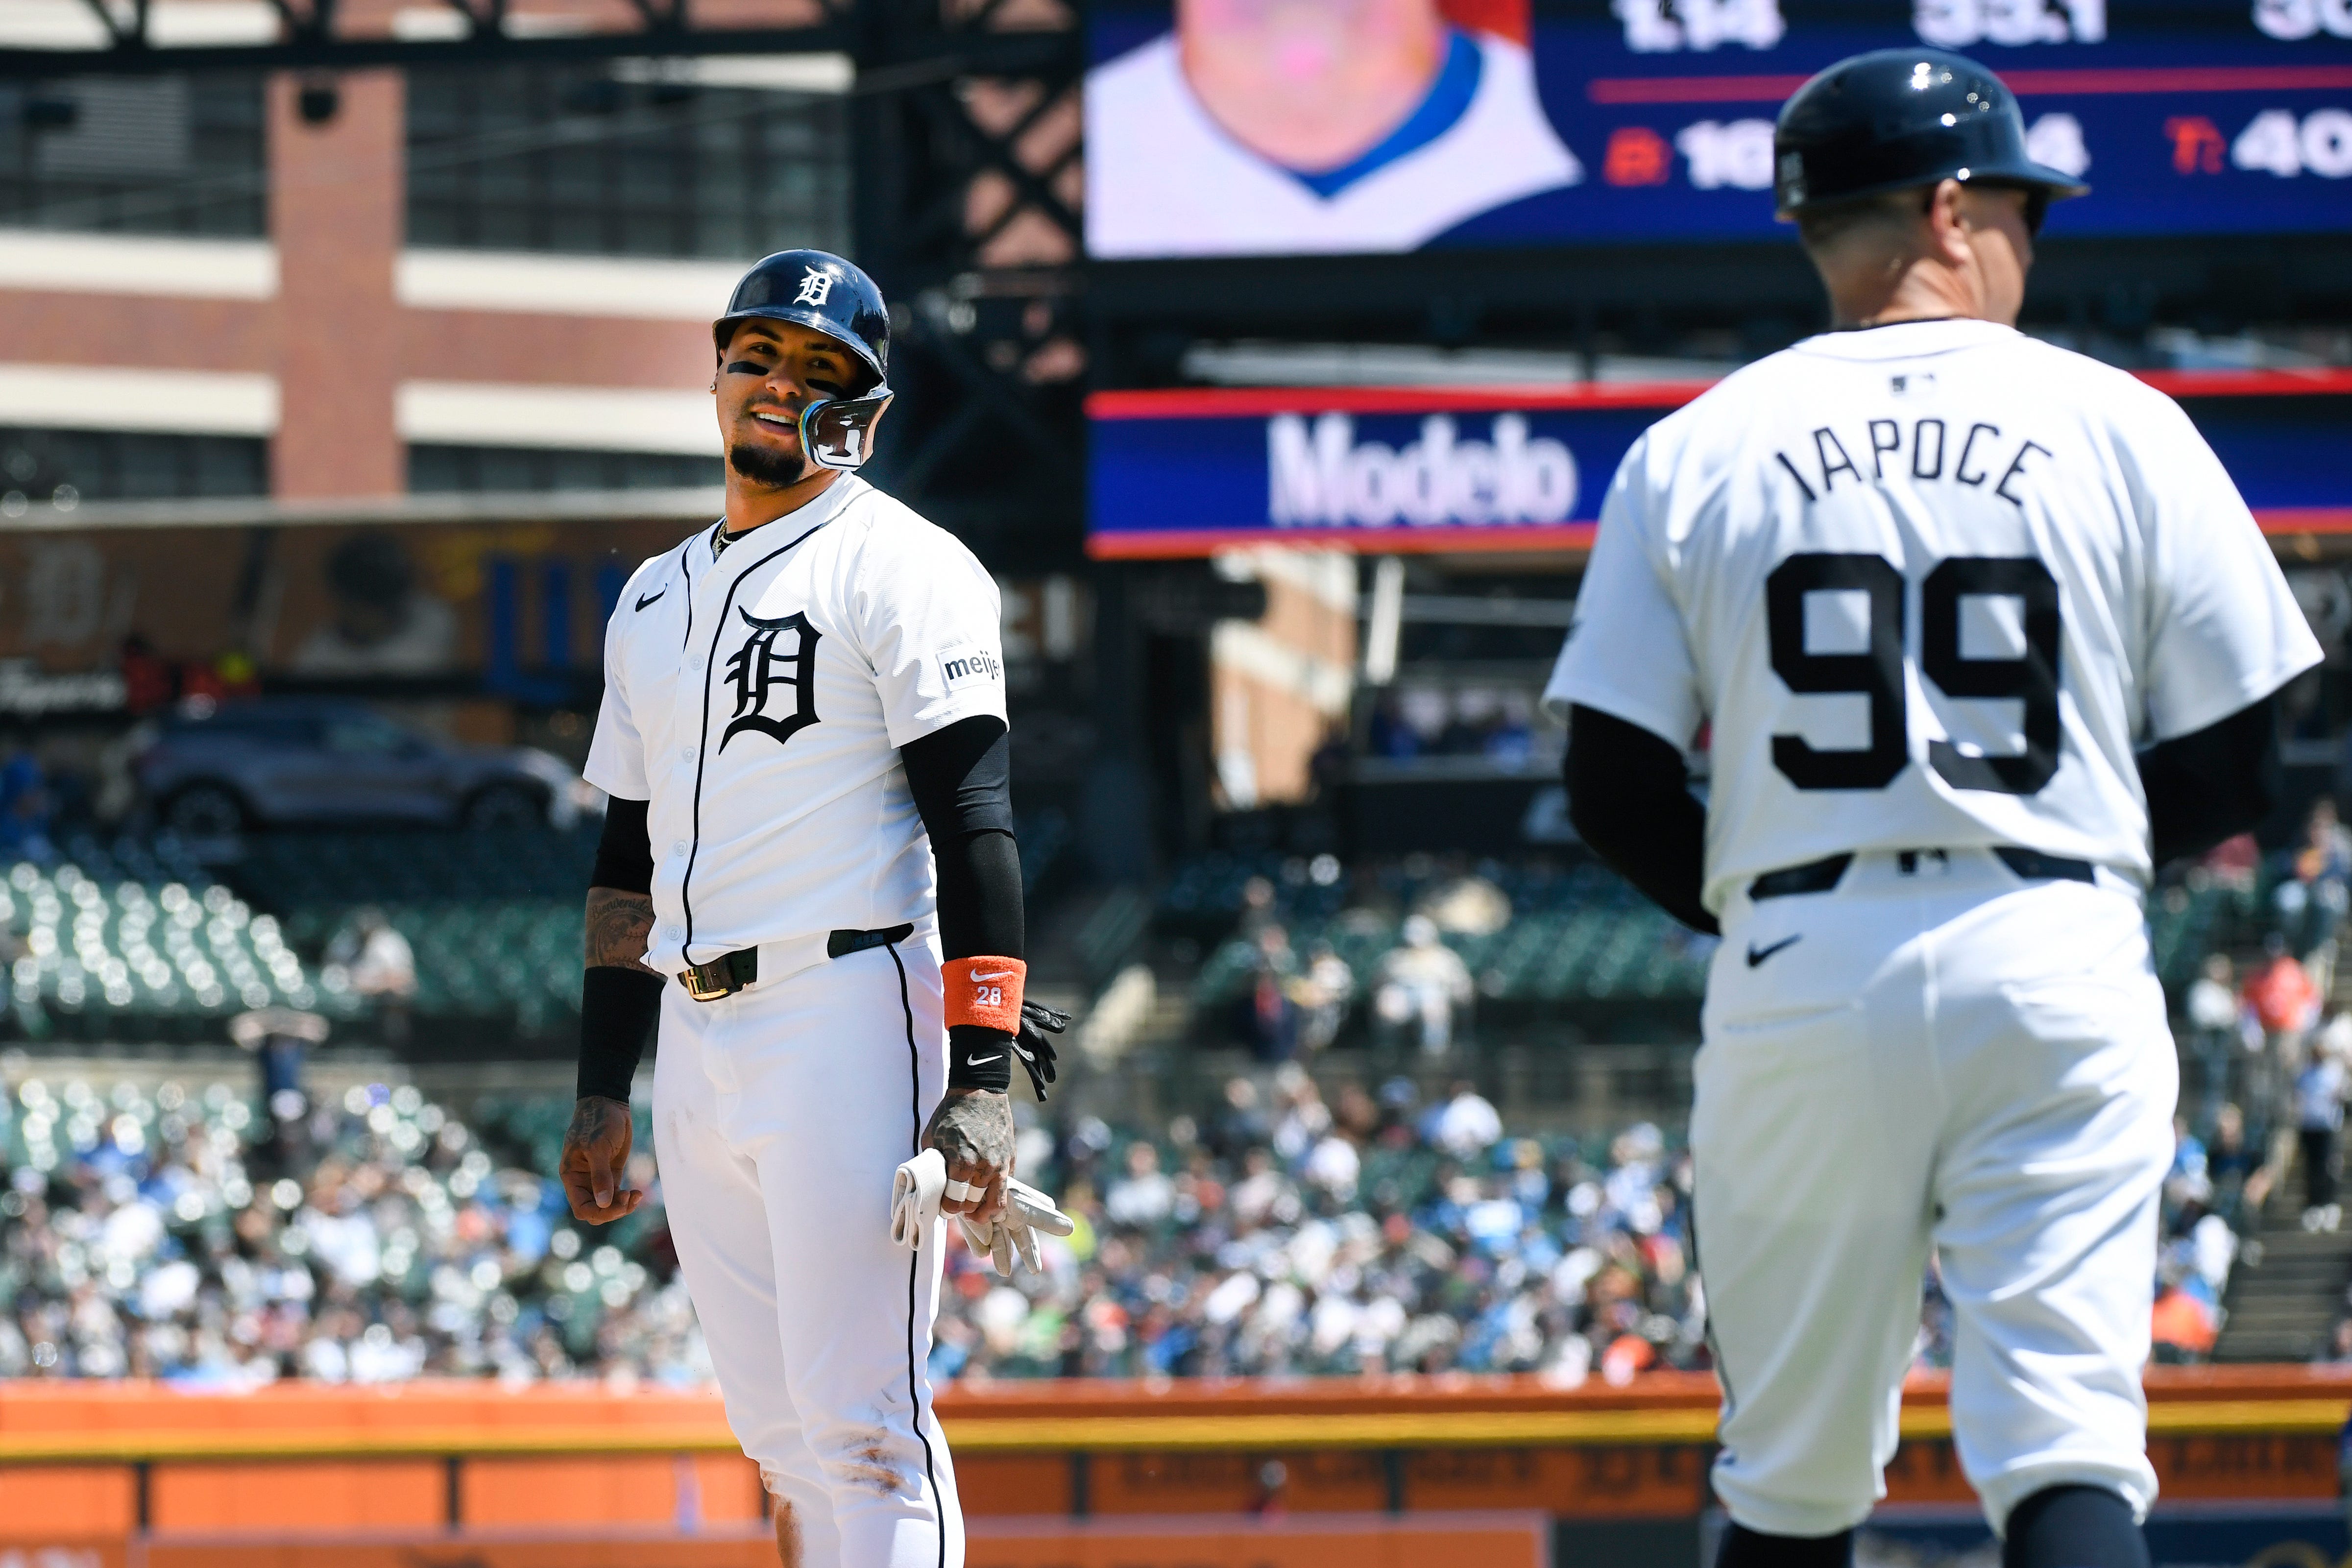 Tigers' Javier Báez, left, looks at first base coach Anthony Iapoce after he was thrown out at first base by Royals right fielder Adam Frazier to complete a double play in the third inning.